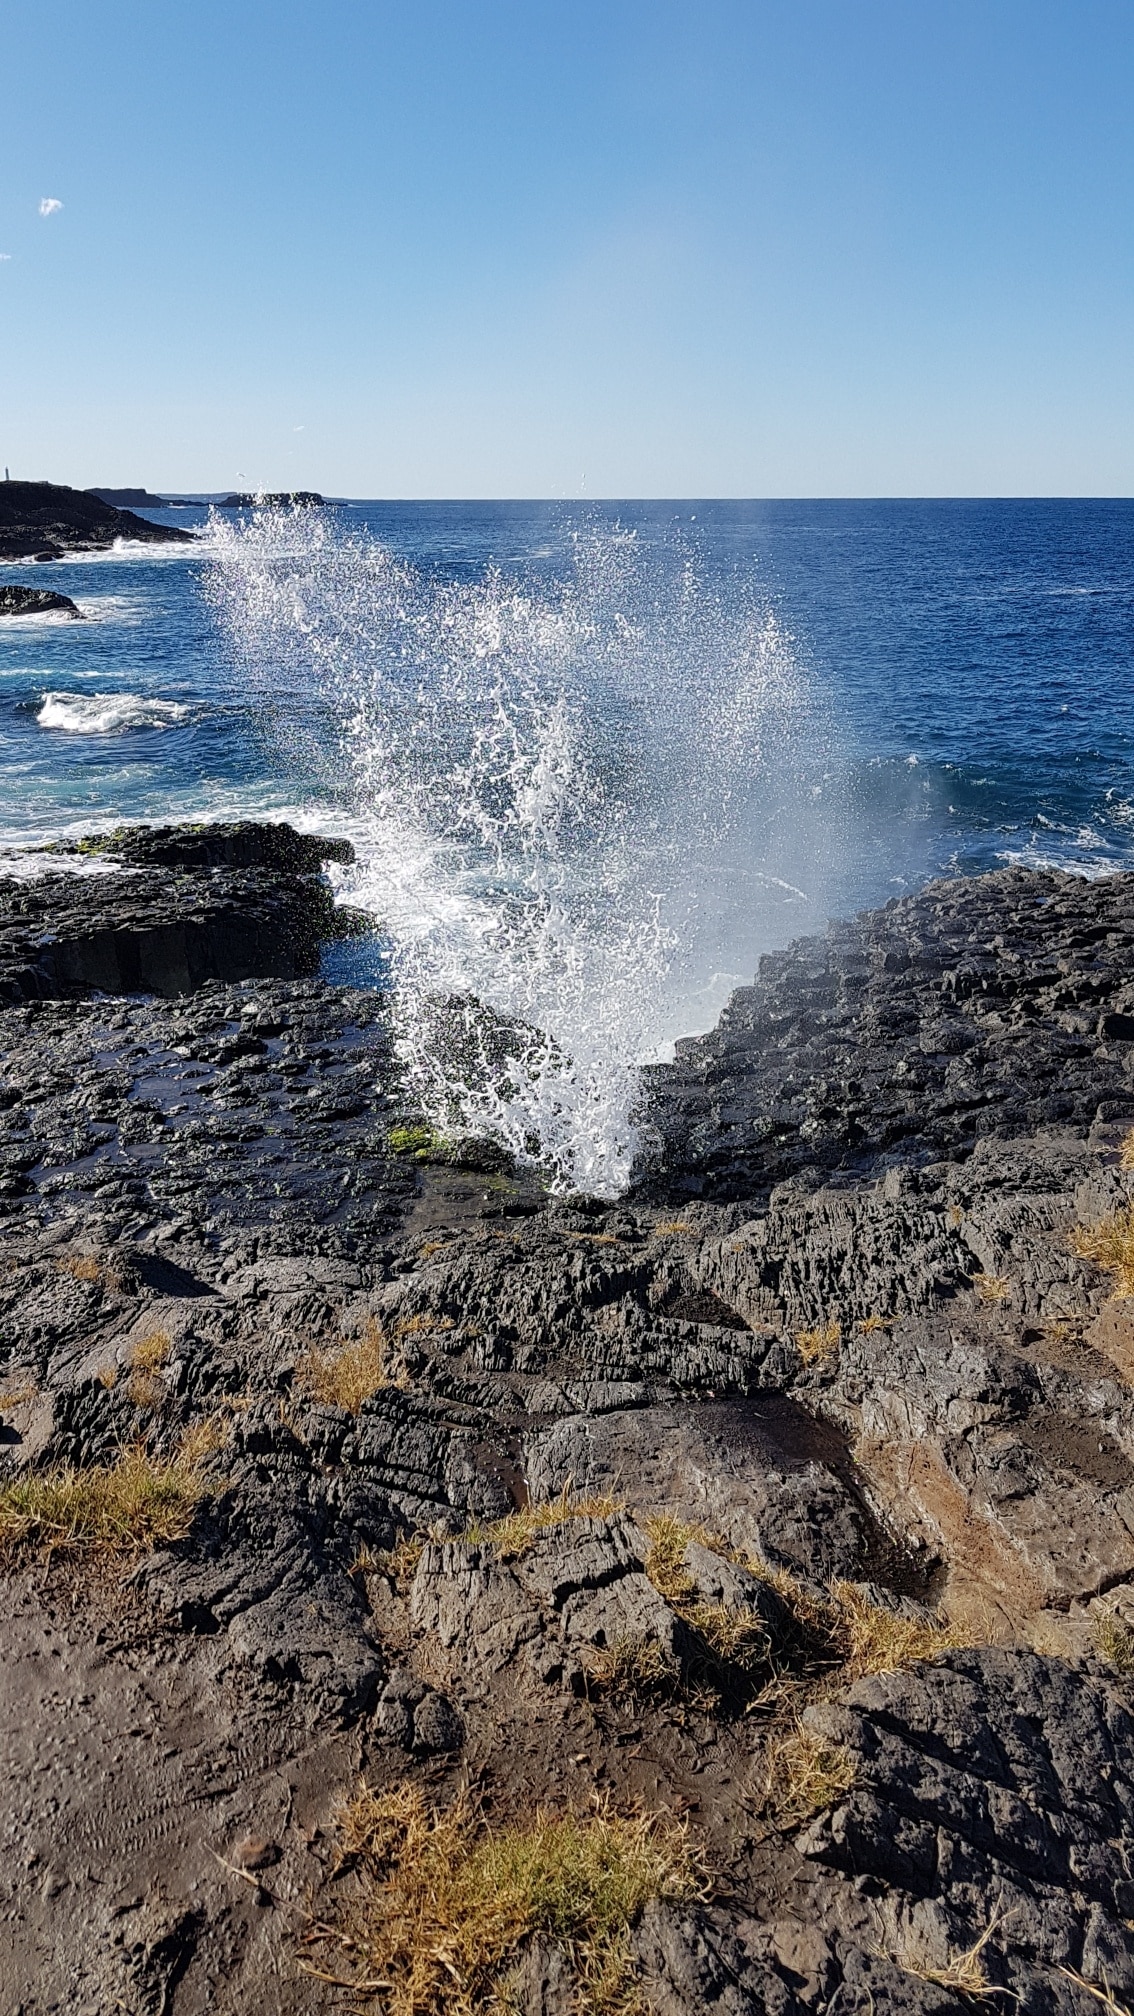 I love this spot. It doesn't get as busy as the main Kiama blowhole and the views are amazing.